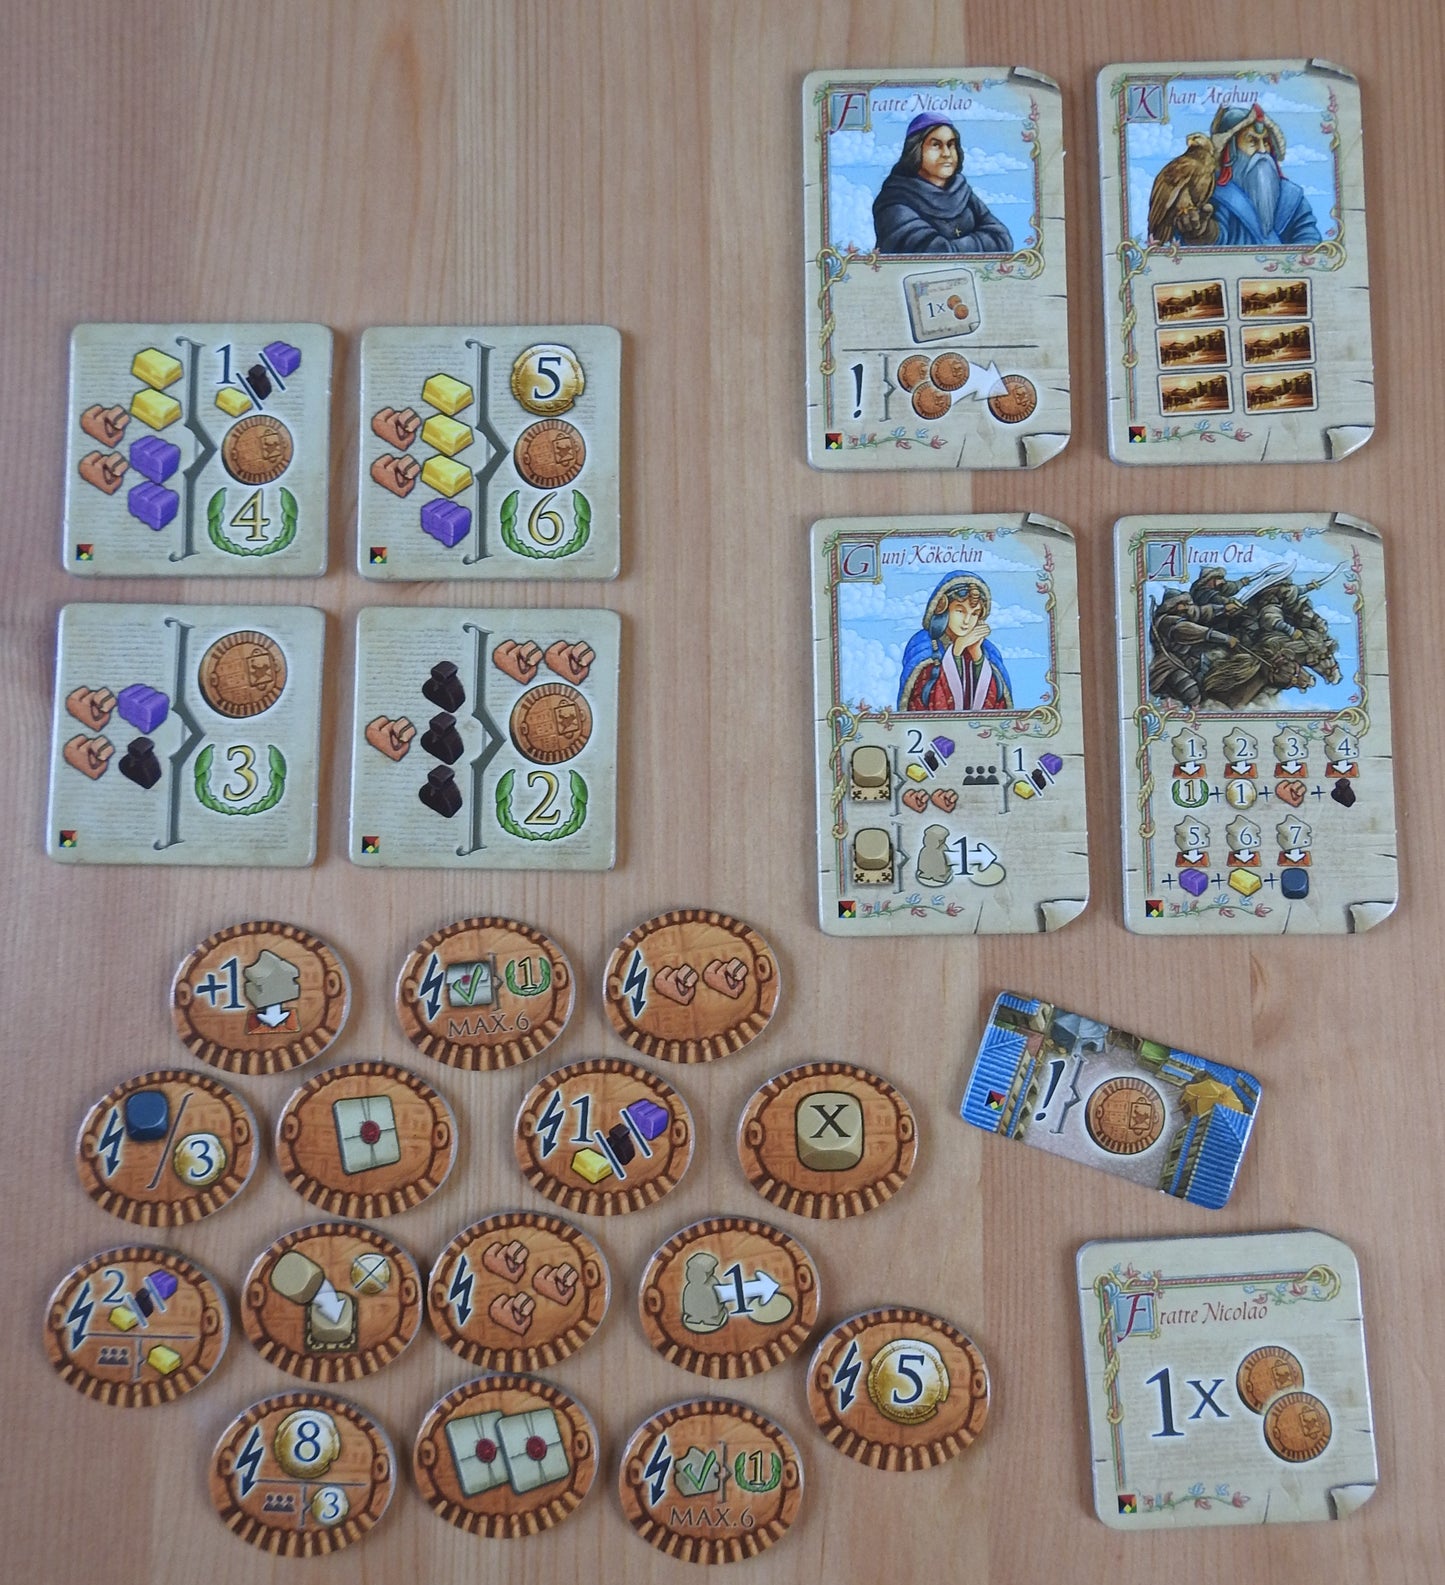 Top view showing the 4 new characters, 4 contracts, 15 goal tokens and 2 other tokens included with this Marco Polo - New Characters mini expansion.